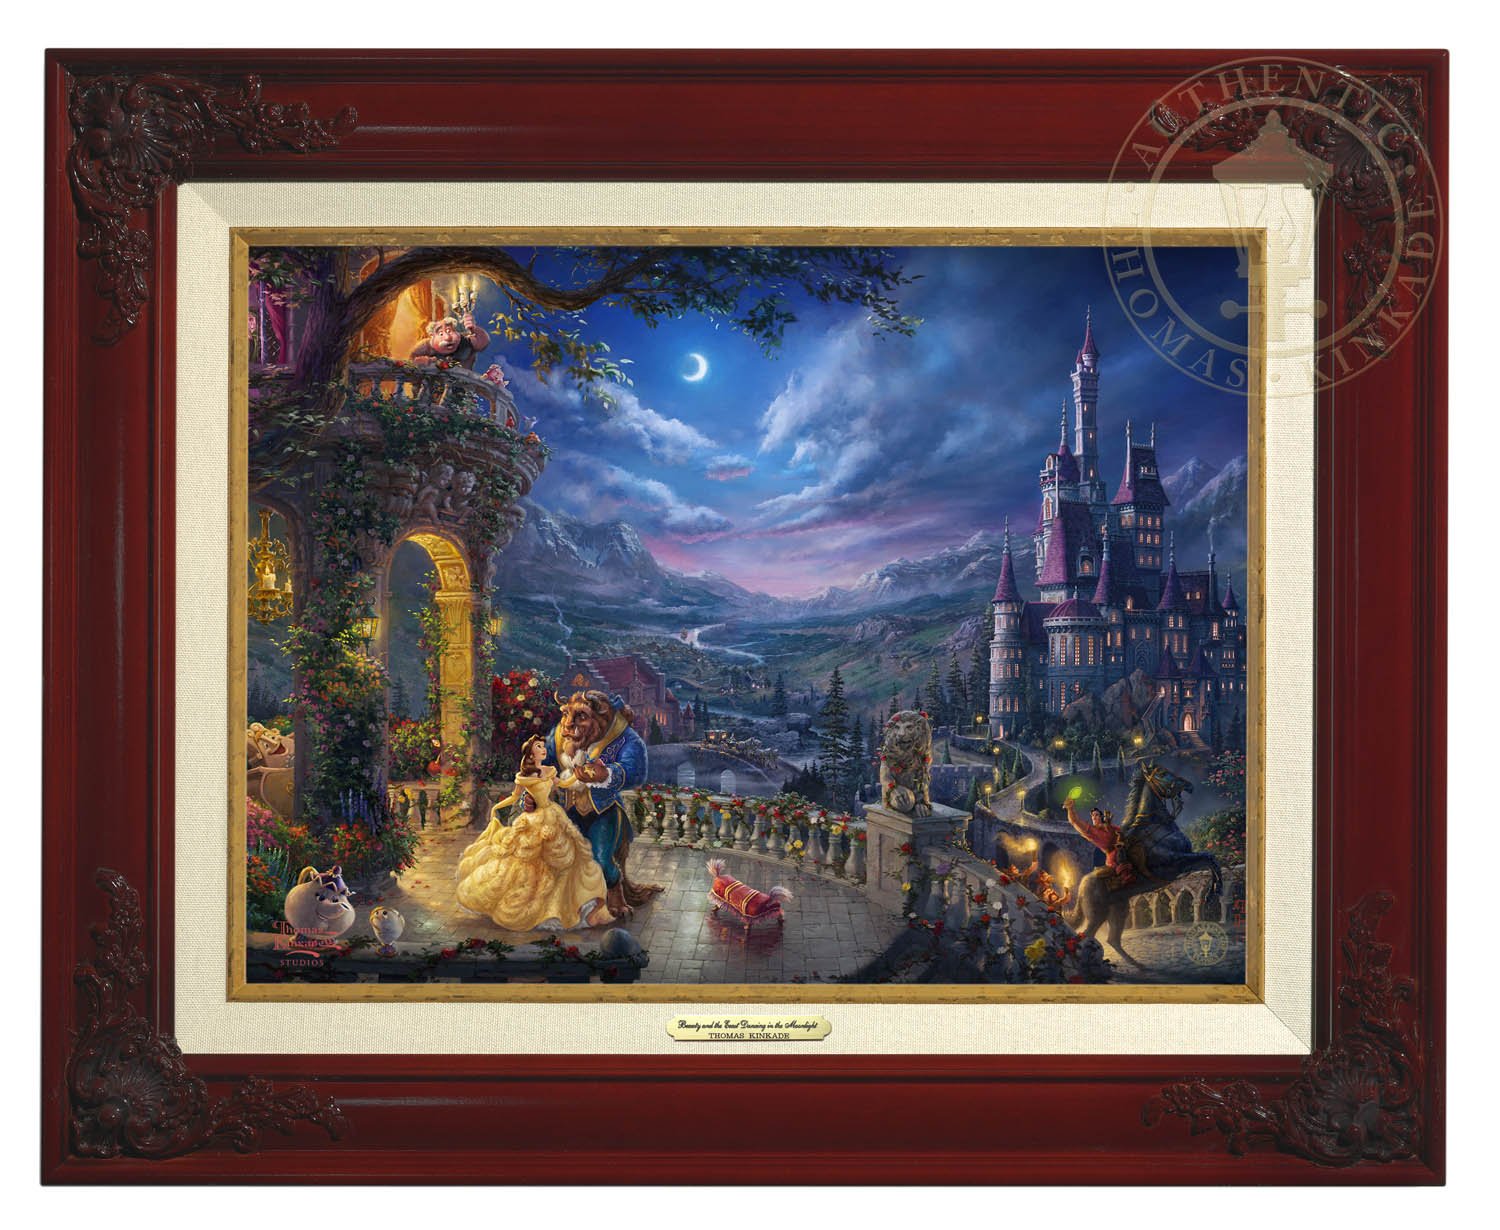 Belle and the Beast celebrate their love under the dreamy moonlit sky, with all their friend enjoying the moments - Brandy Frame.